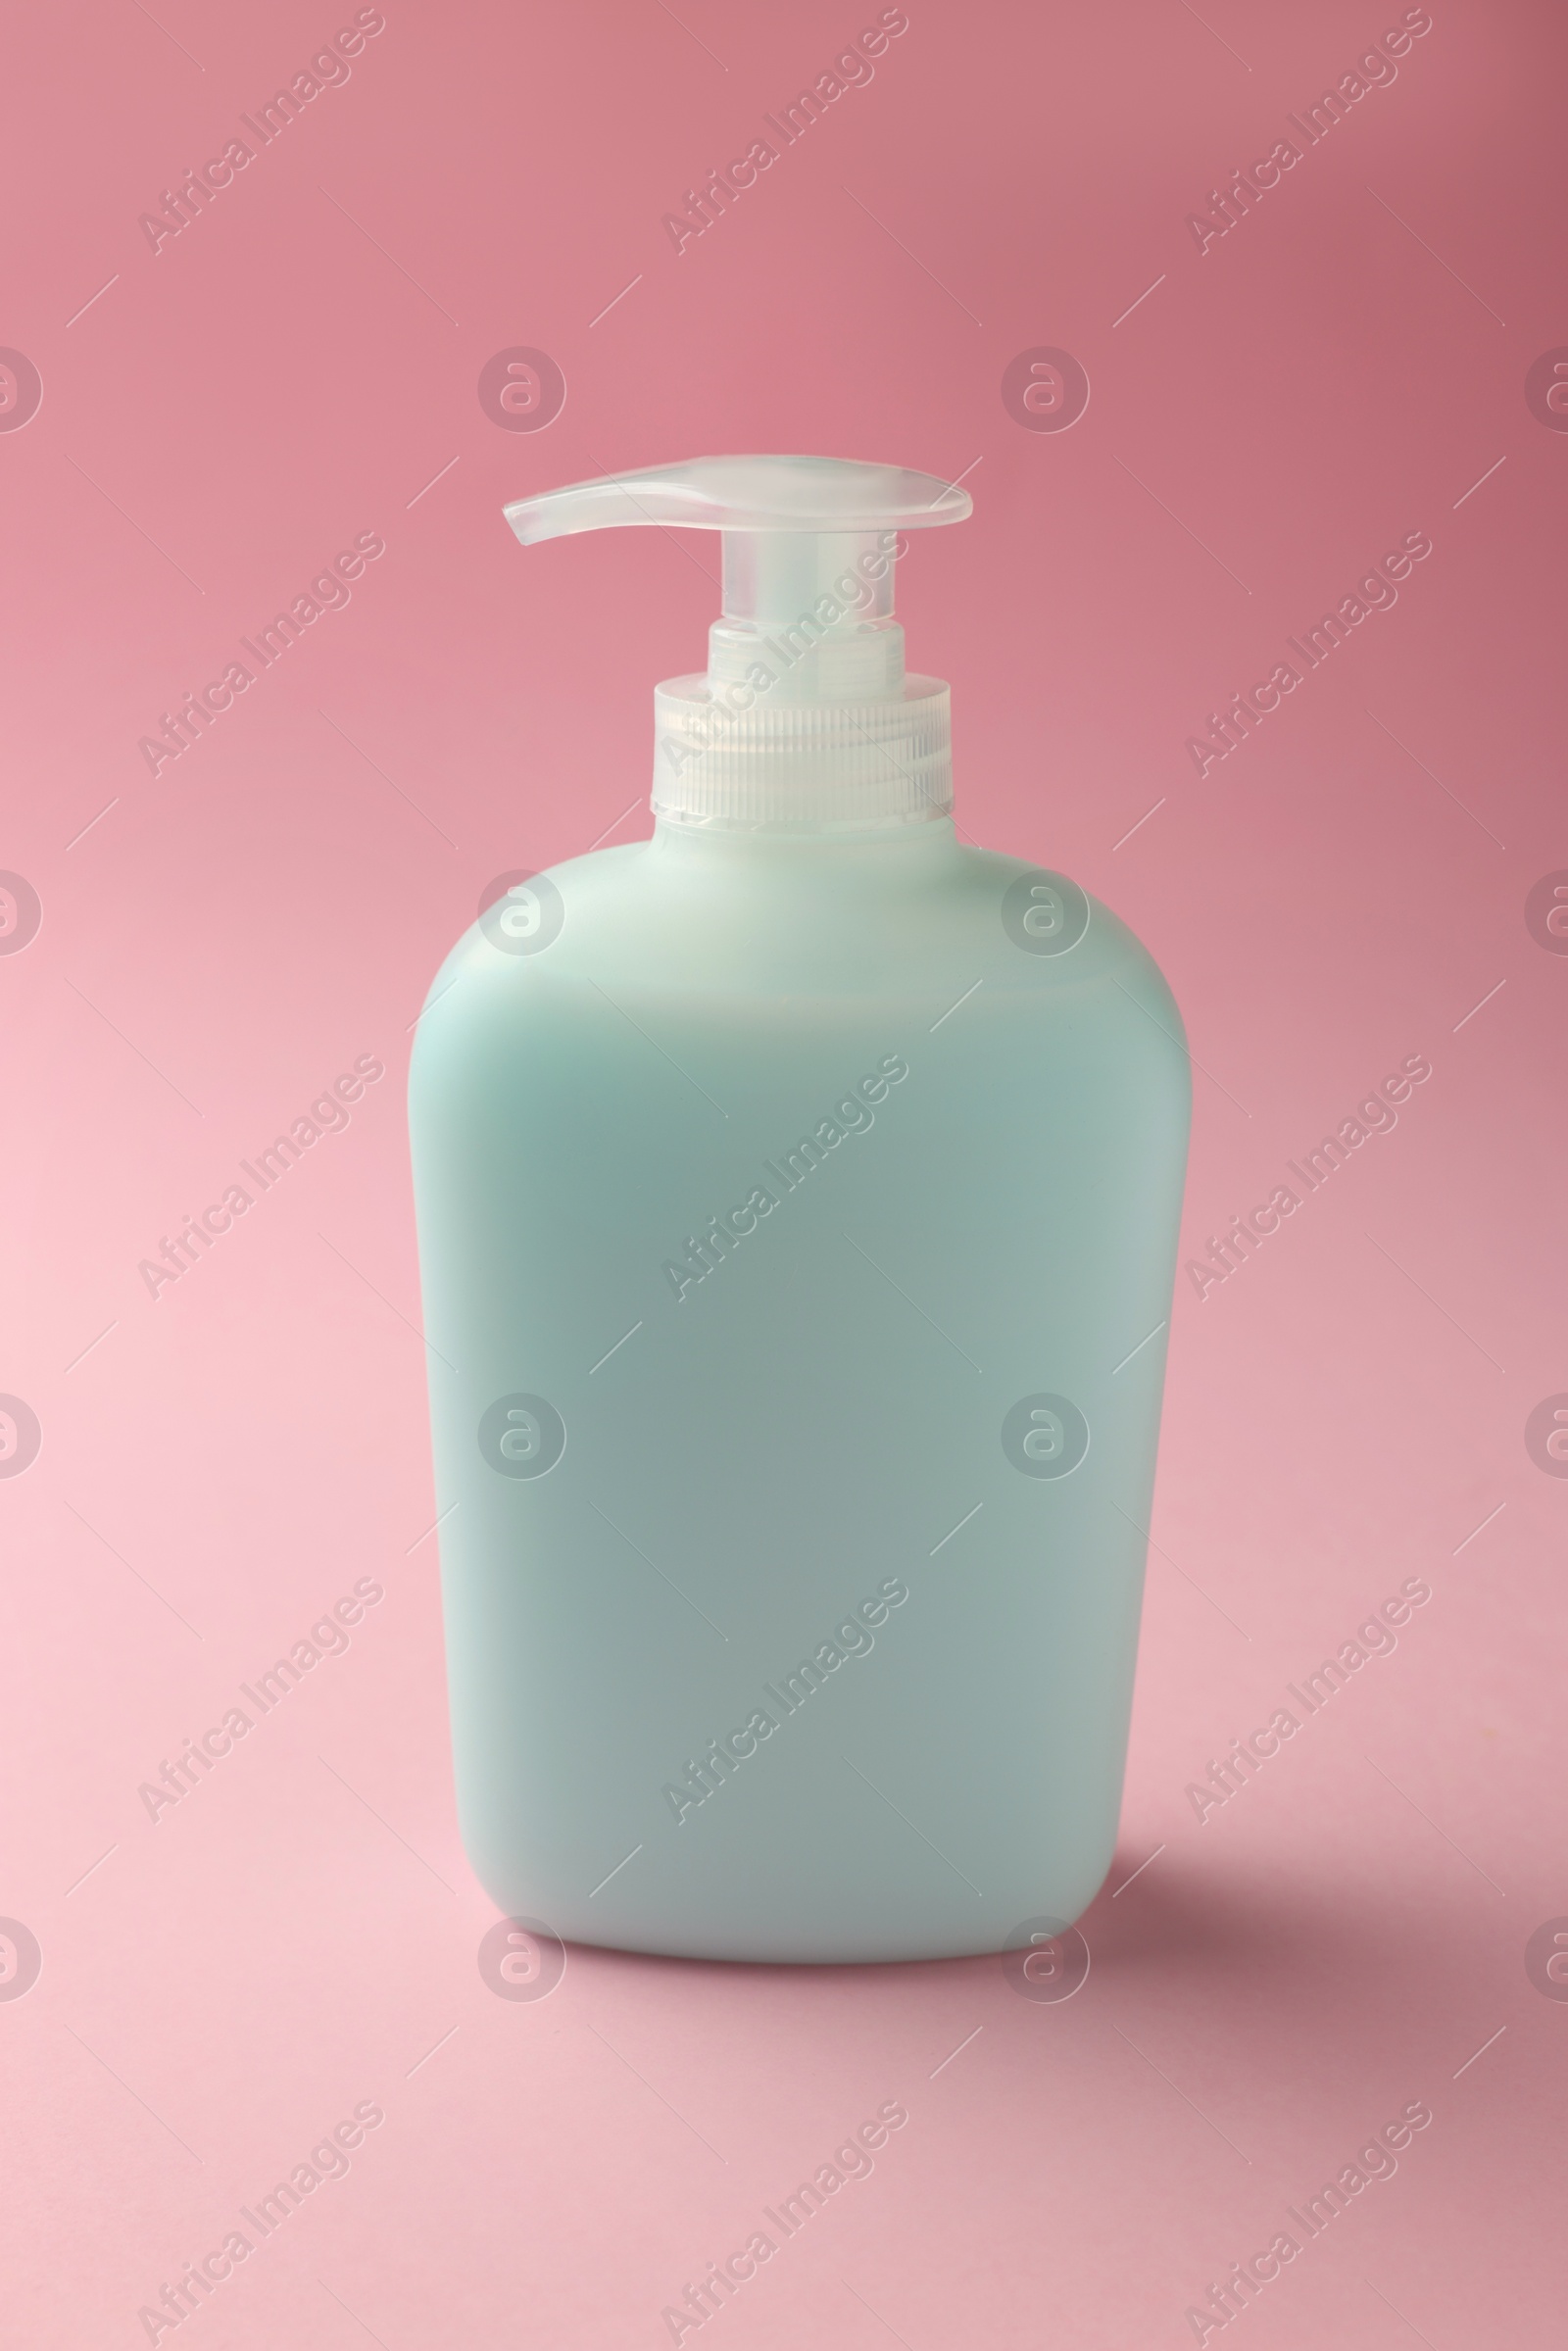 Photo of Bottle of liquid soap on pink background